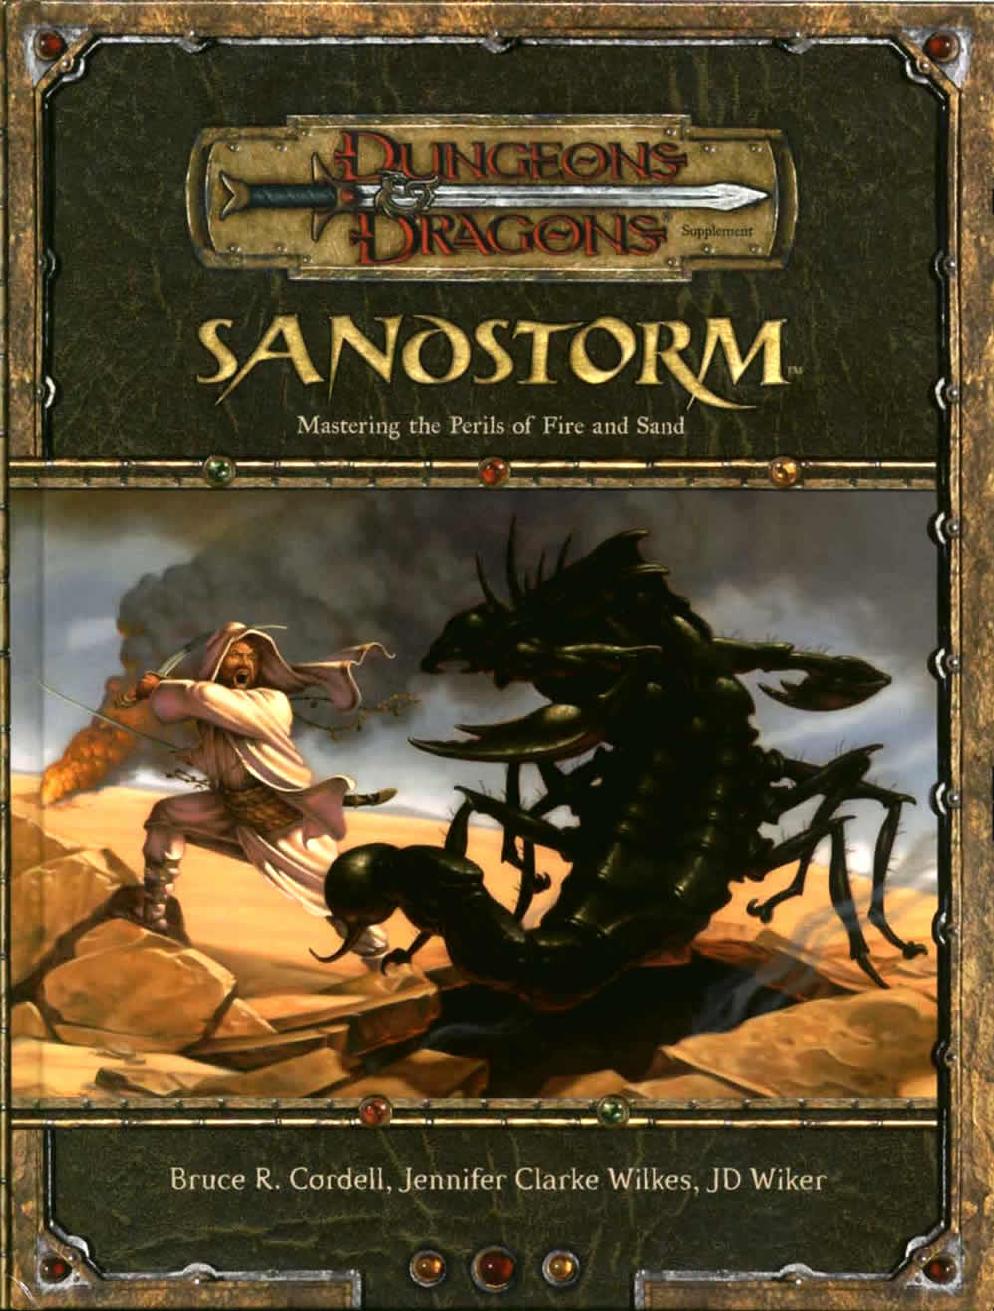 Sandstorm: Mastering the Perils of Fire and Sand